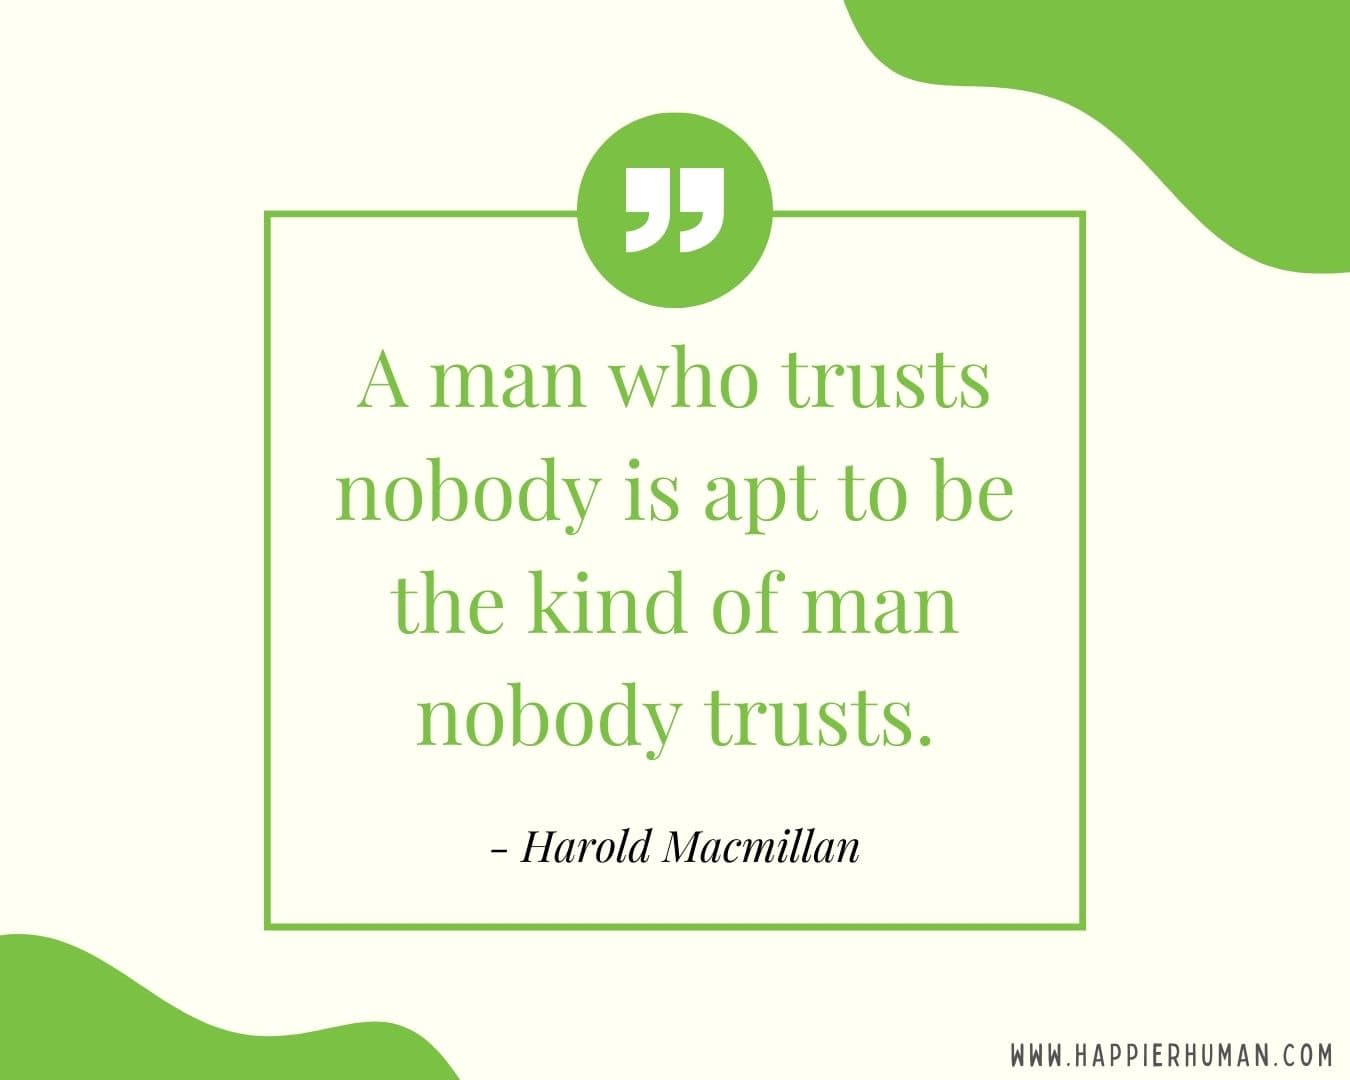 Broken Trust Quotes - “A man who trusts nobody is apt to be the kind of man nobody trusts.” - Harold Macmillan